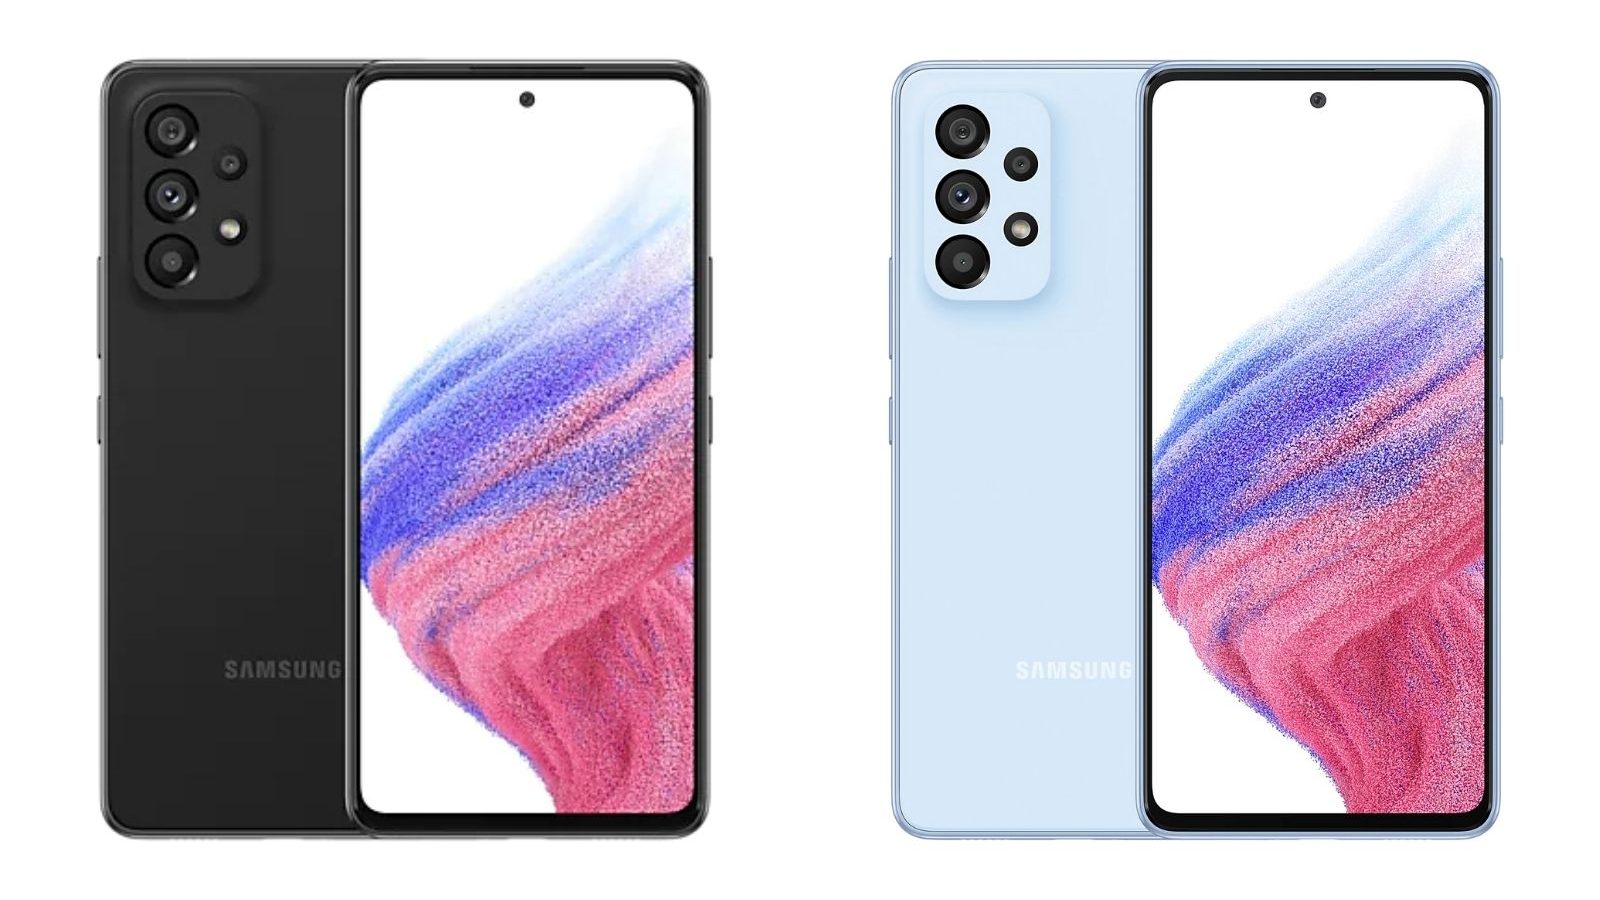  The image shows two Samsung Galaxy A53 5G smartphones in black and blue colors, with a similar design to the iPhone 12.